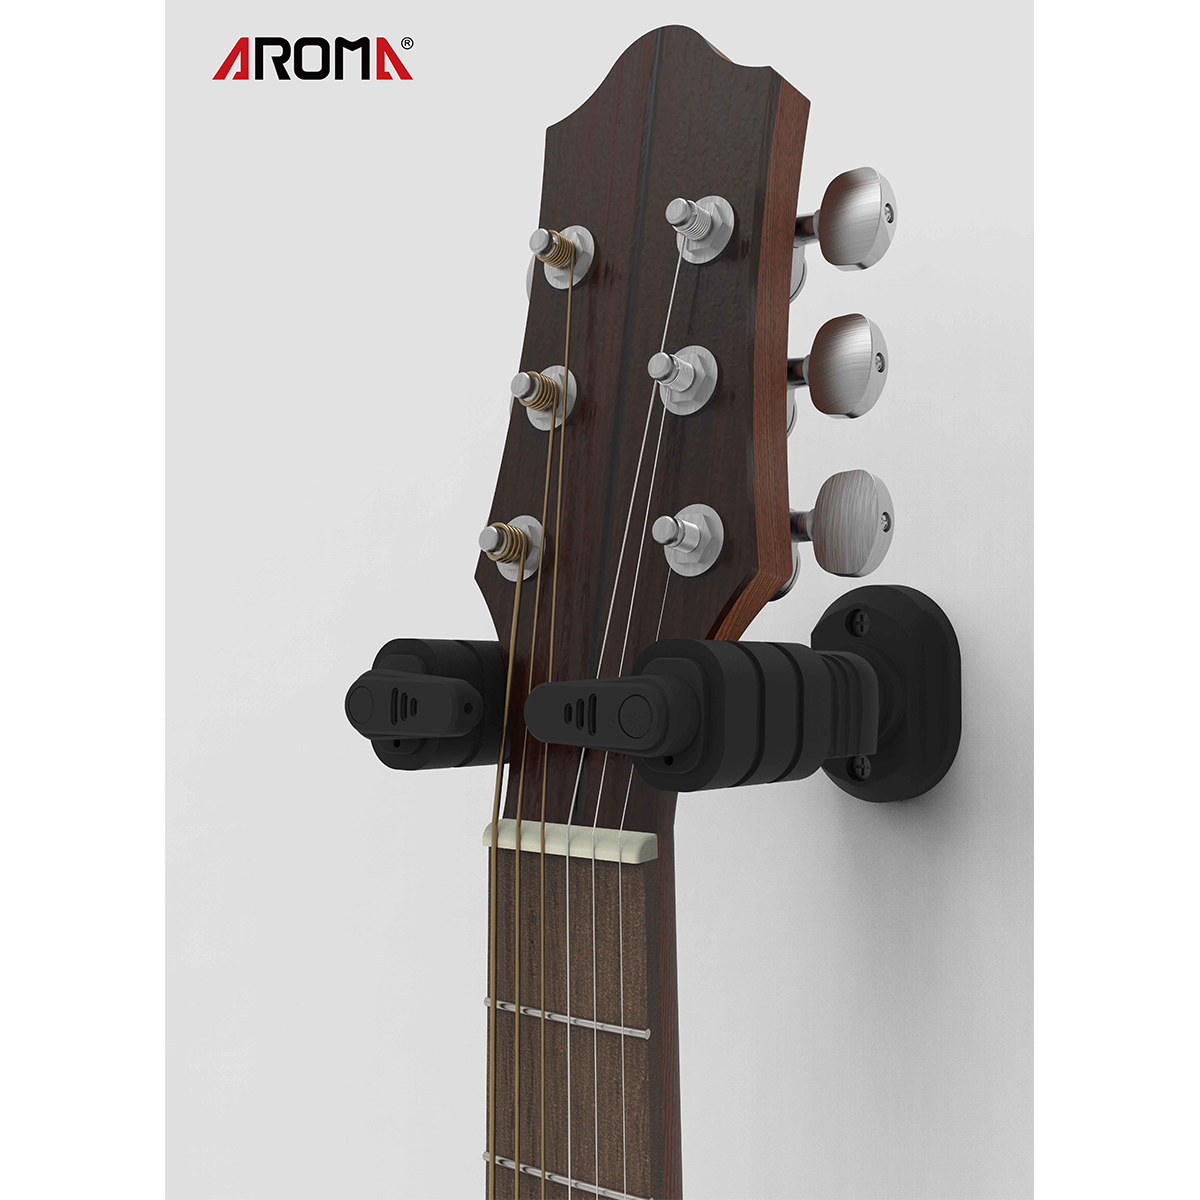 Aroma AH-89 Locking Plastic Guitar Wall Hanger with Wall Mount